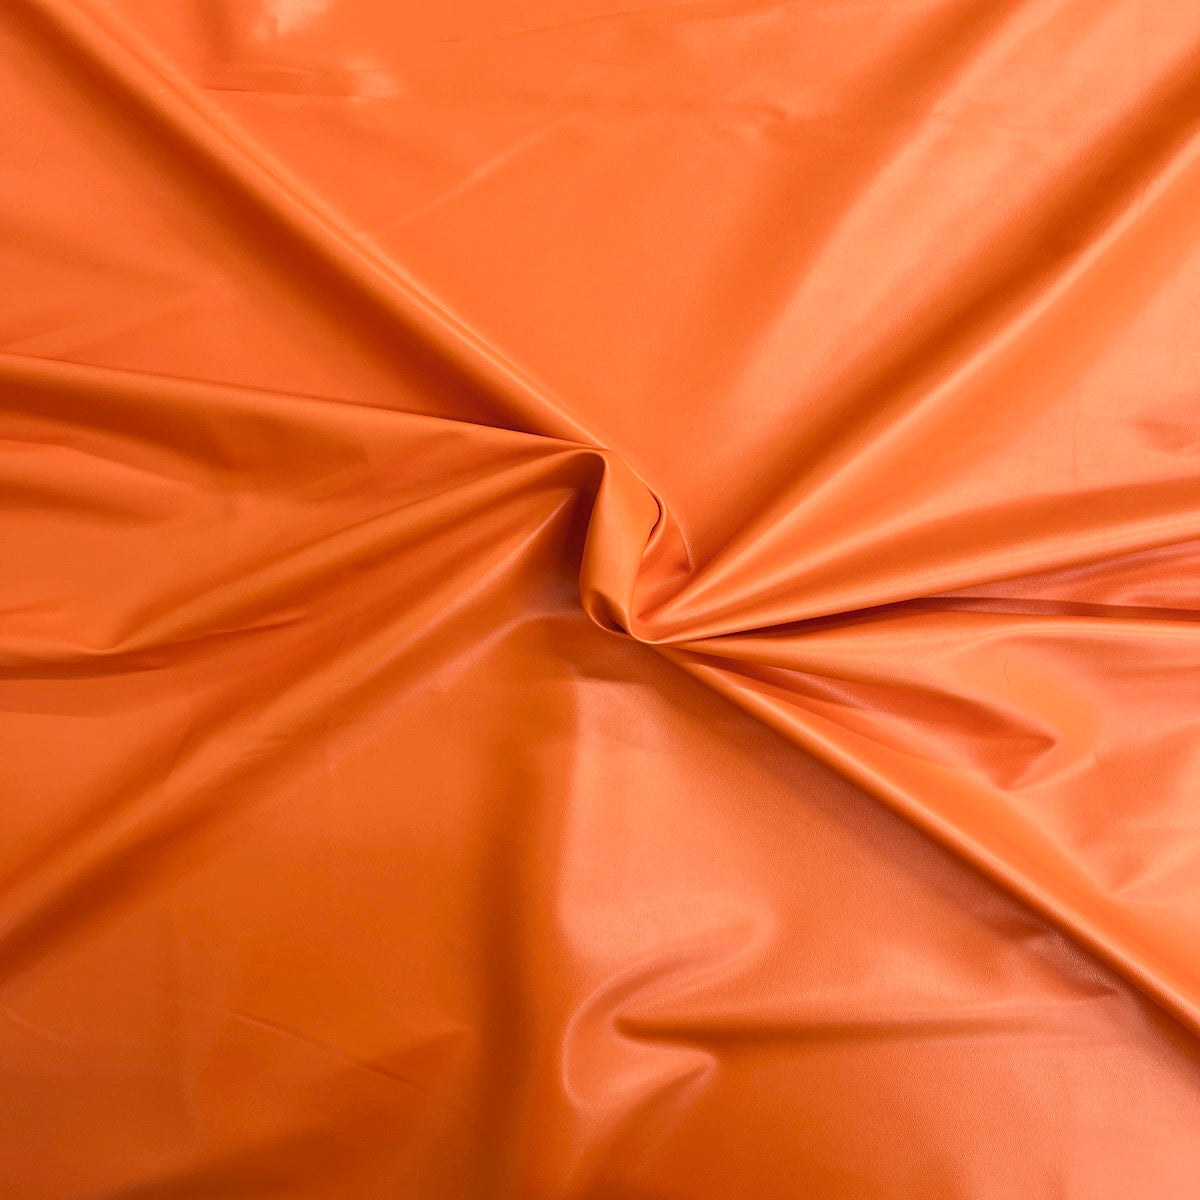 Orange Two Way Stretch Faux Leather Vinyl Fabric